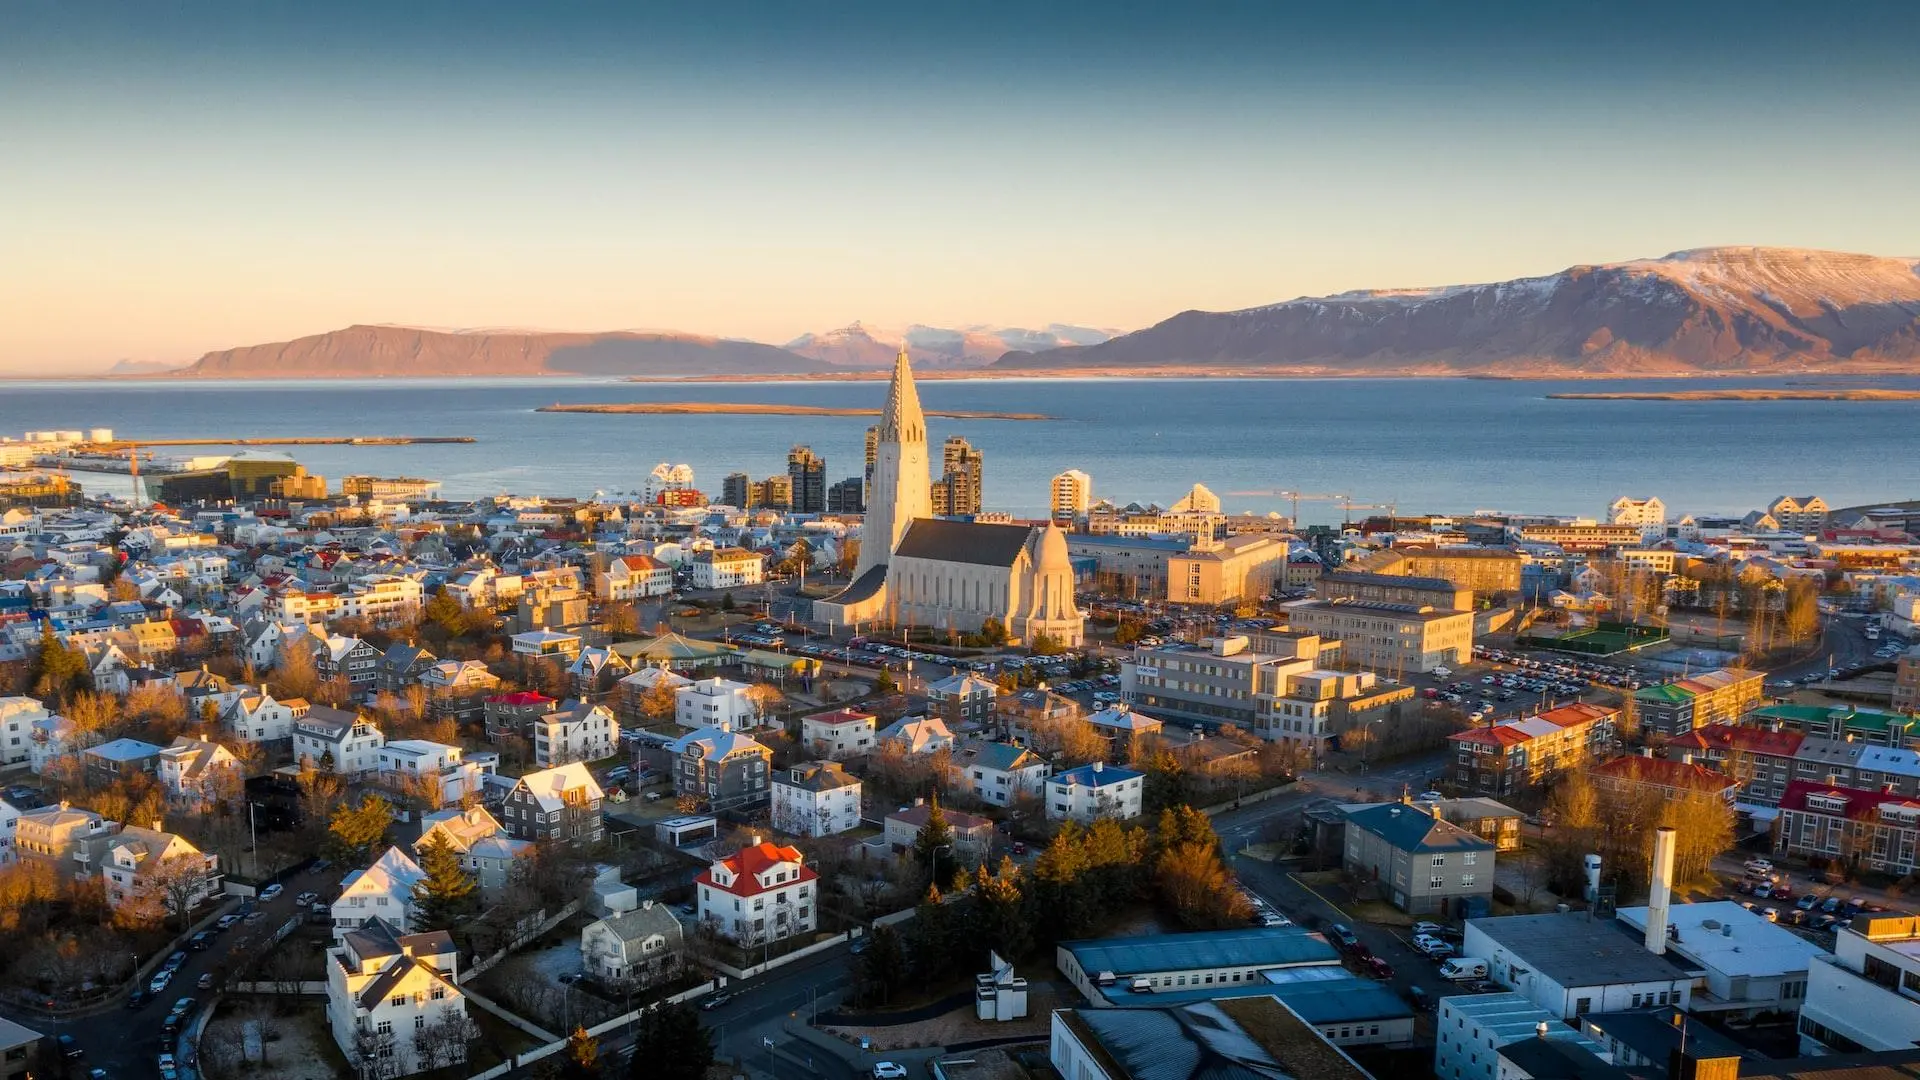 Best Christmas traditions in Reykjavik